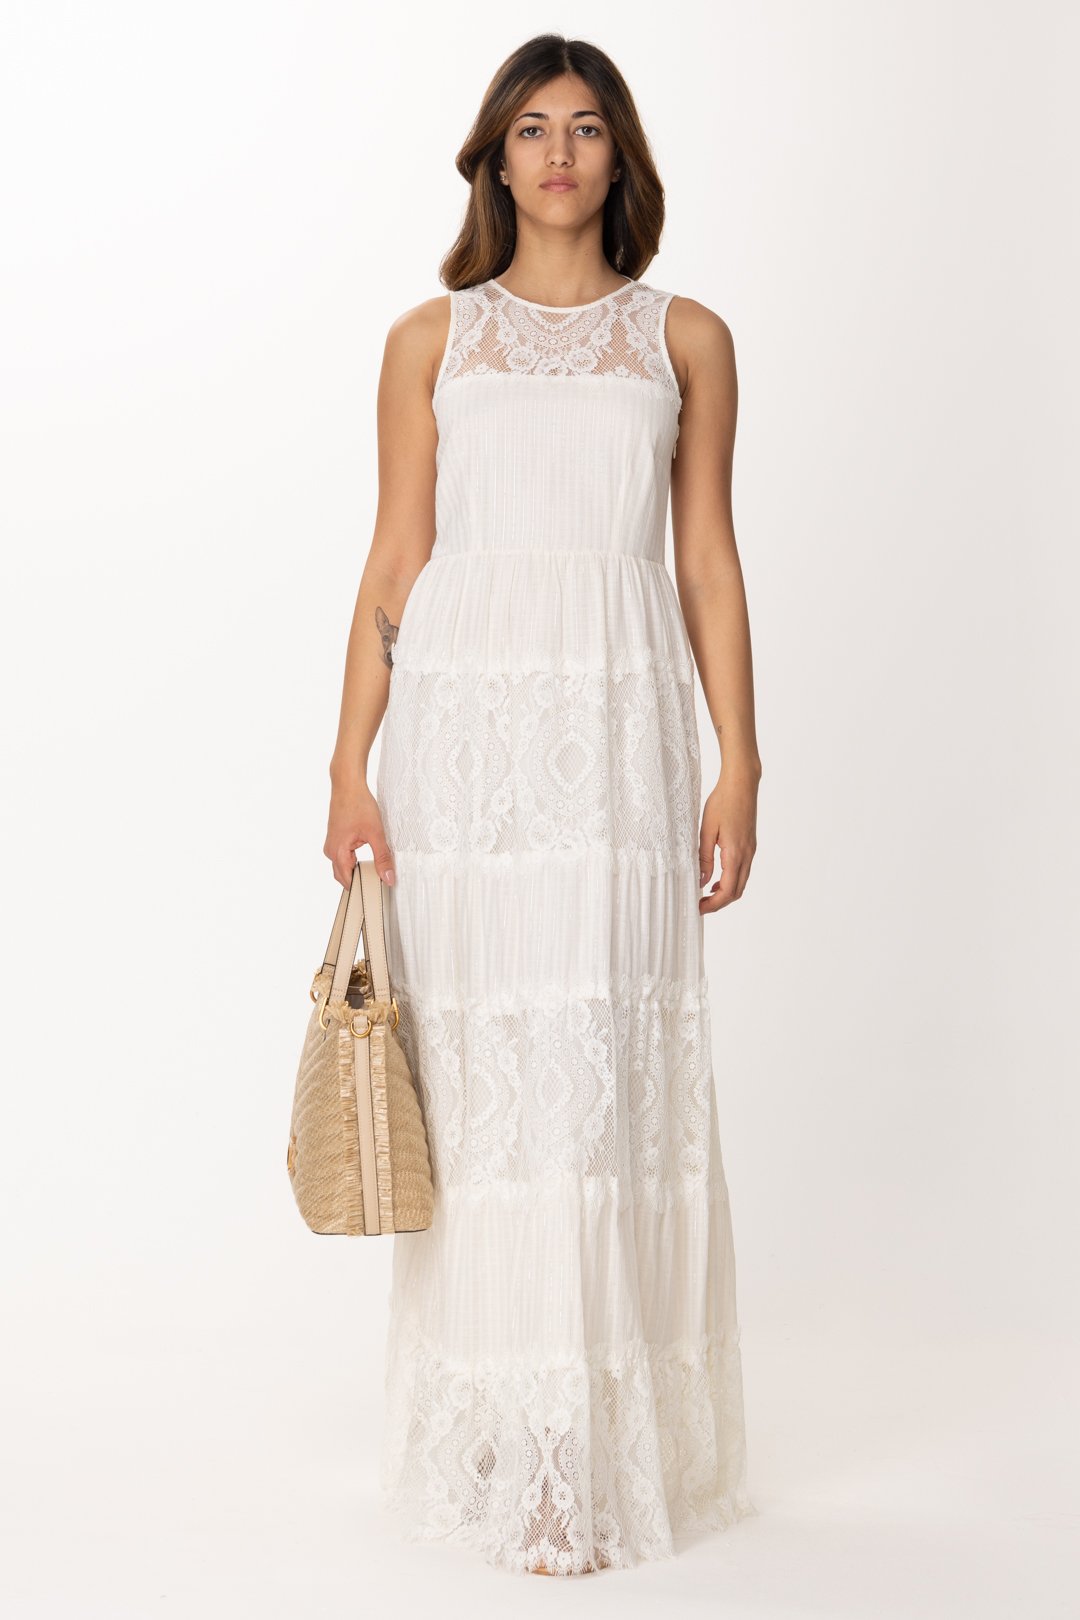 Preview: Twin-Set Muslin and lace sleeveless long dress Avorio